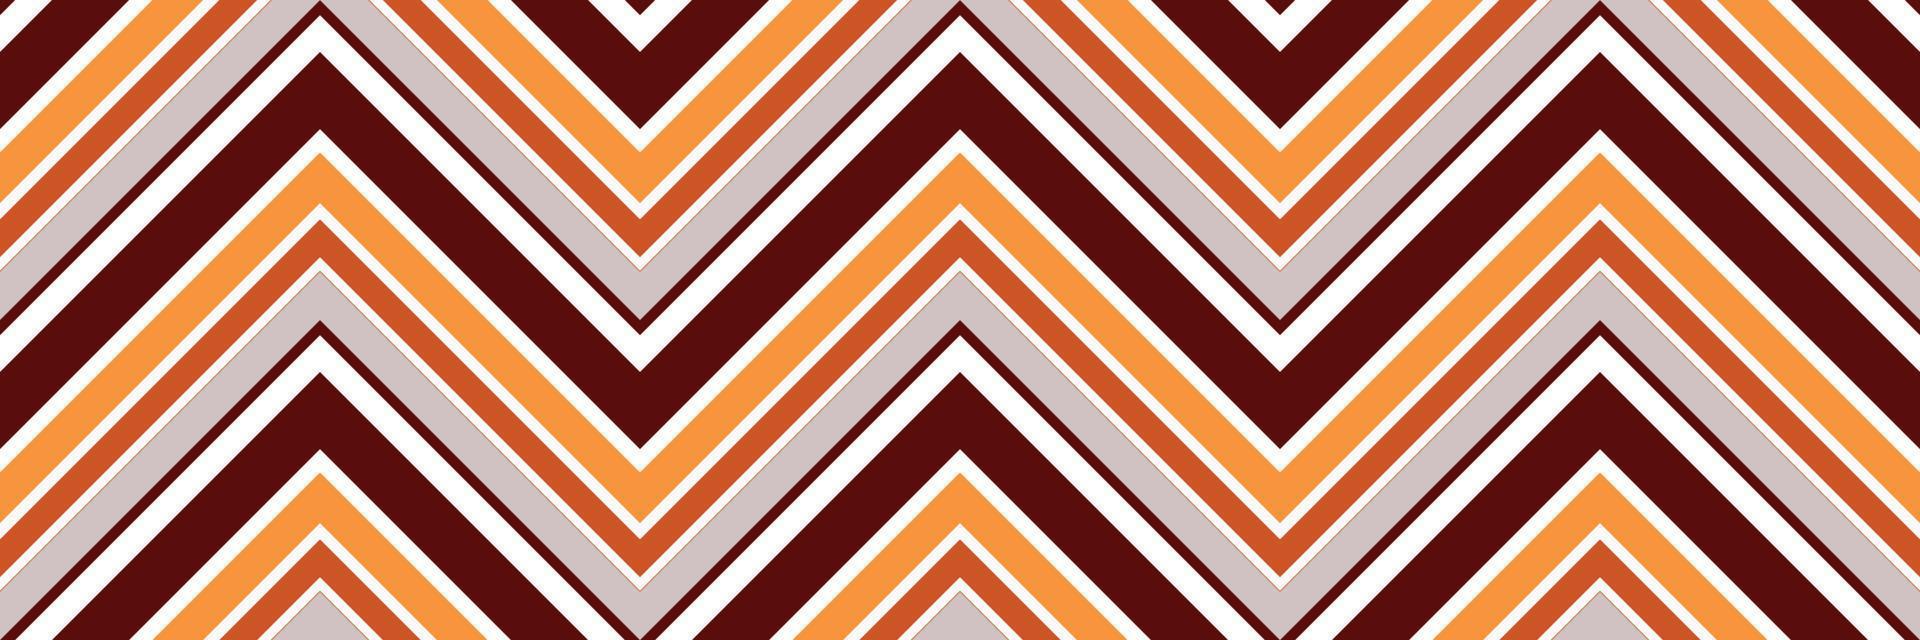 Abstract chevron pattern geometric background for wallpaper, gift paper, fabric print, furniture. Zigzag print. Unusual painted ornament from brush strokes. vector